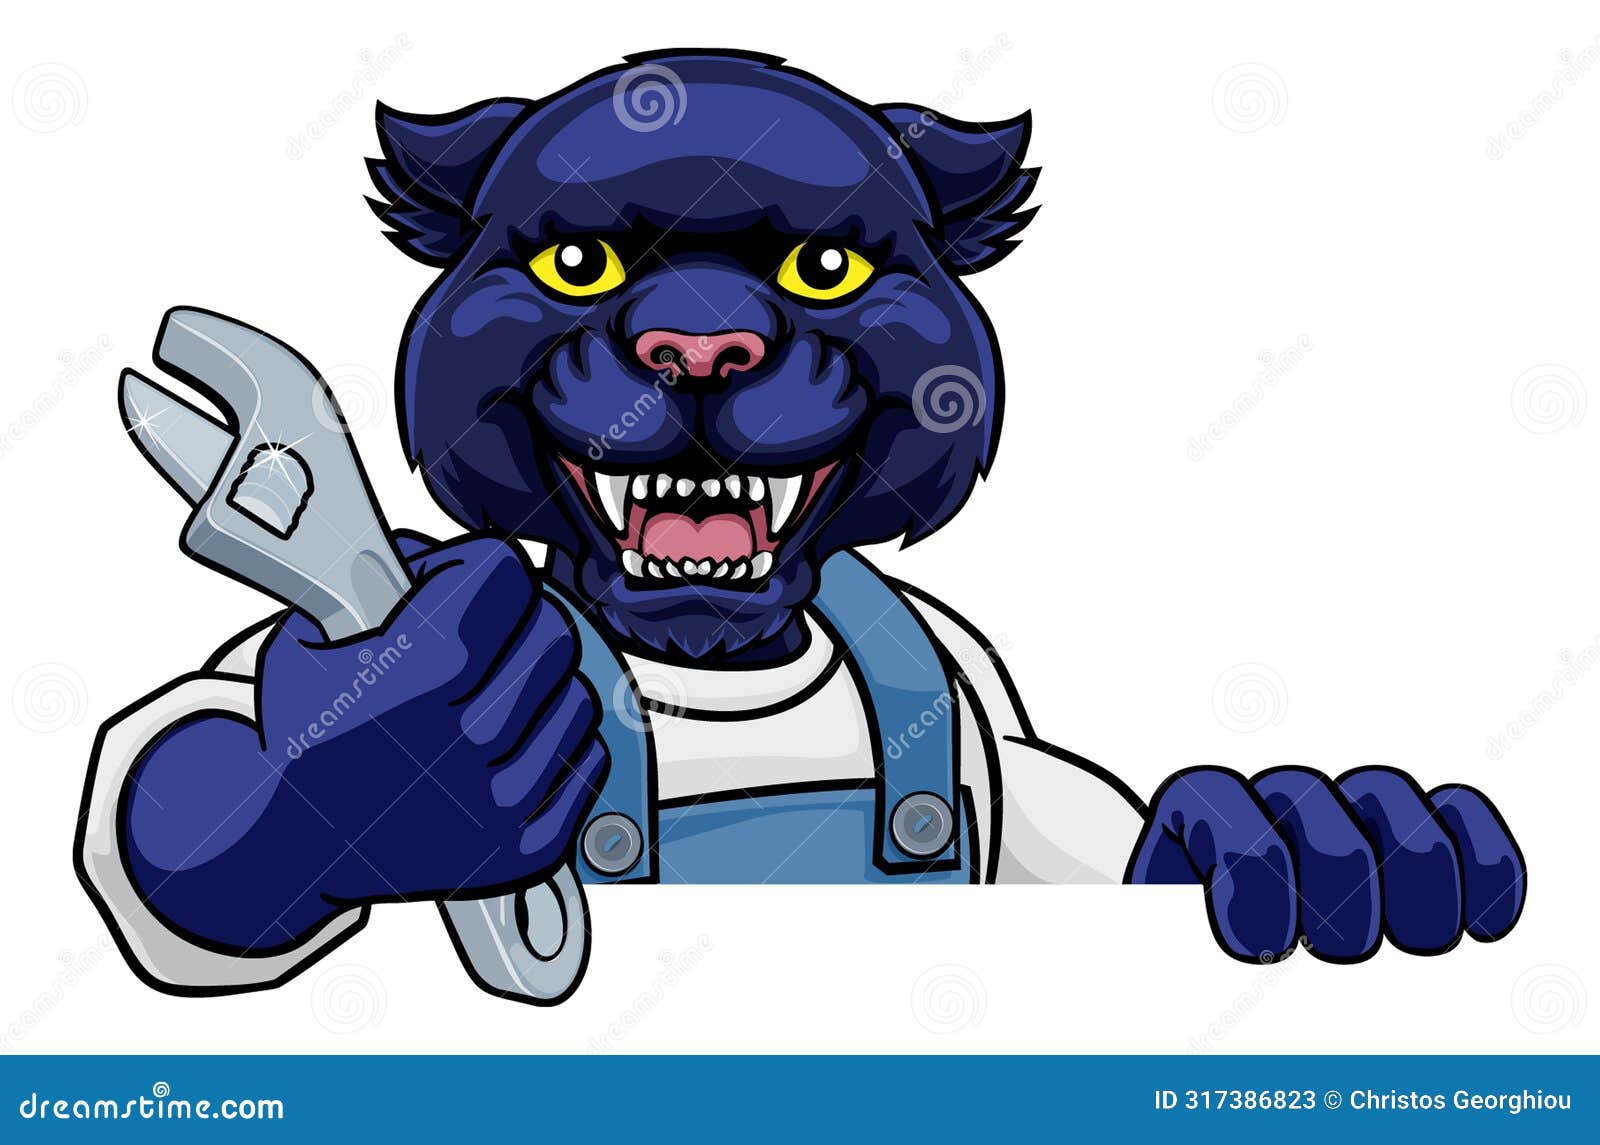 panther plumber or mechanic holding spanner